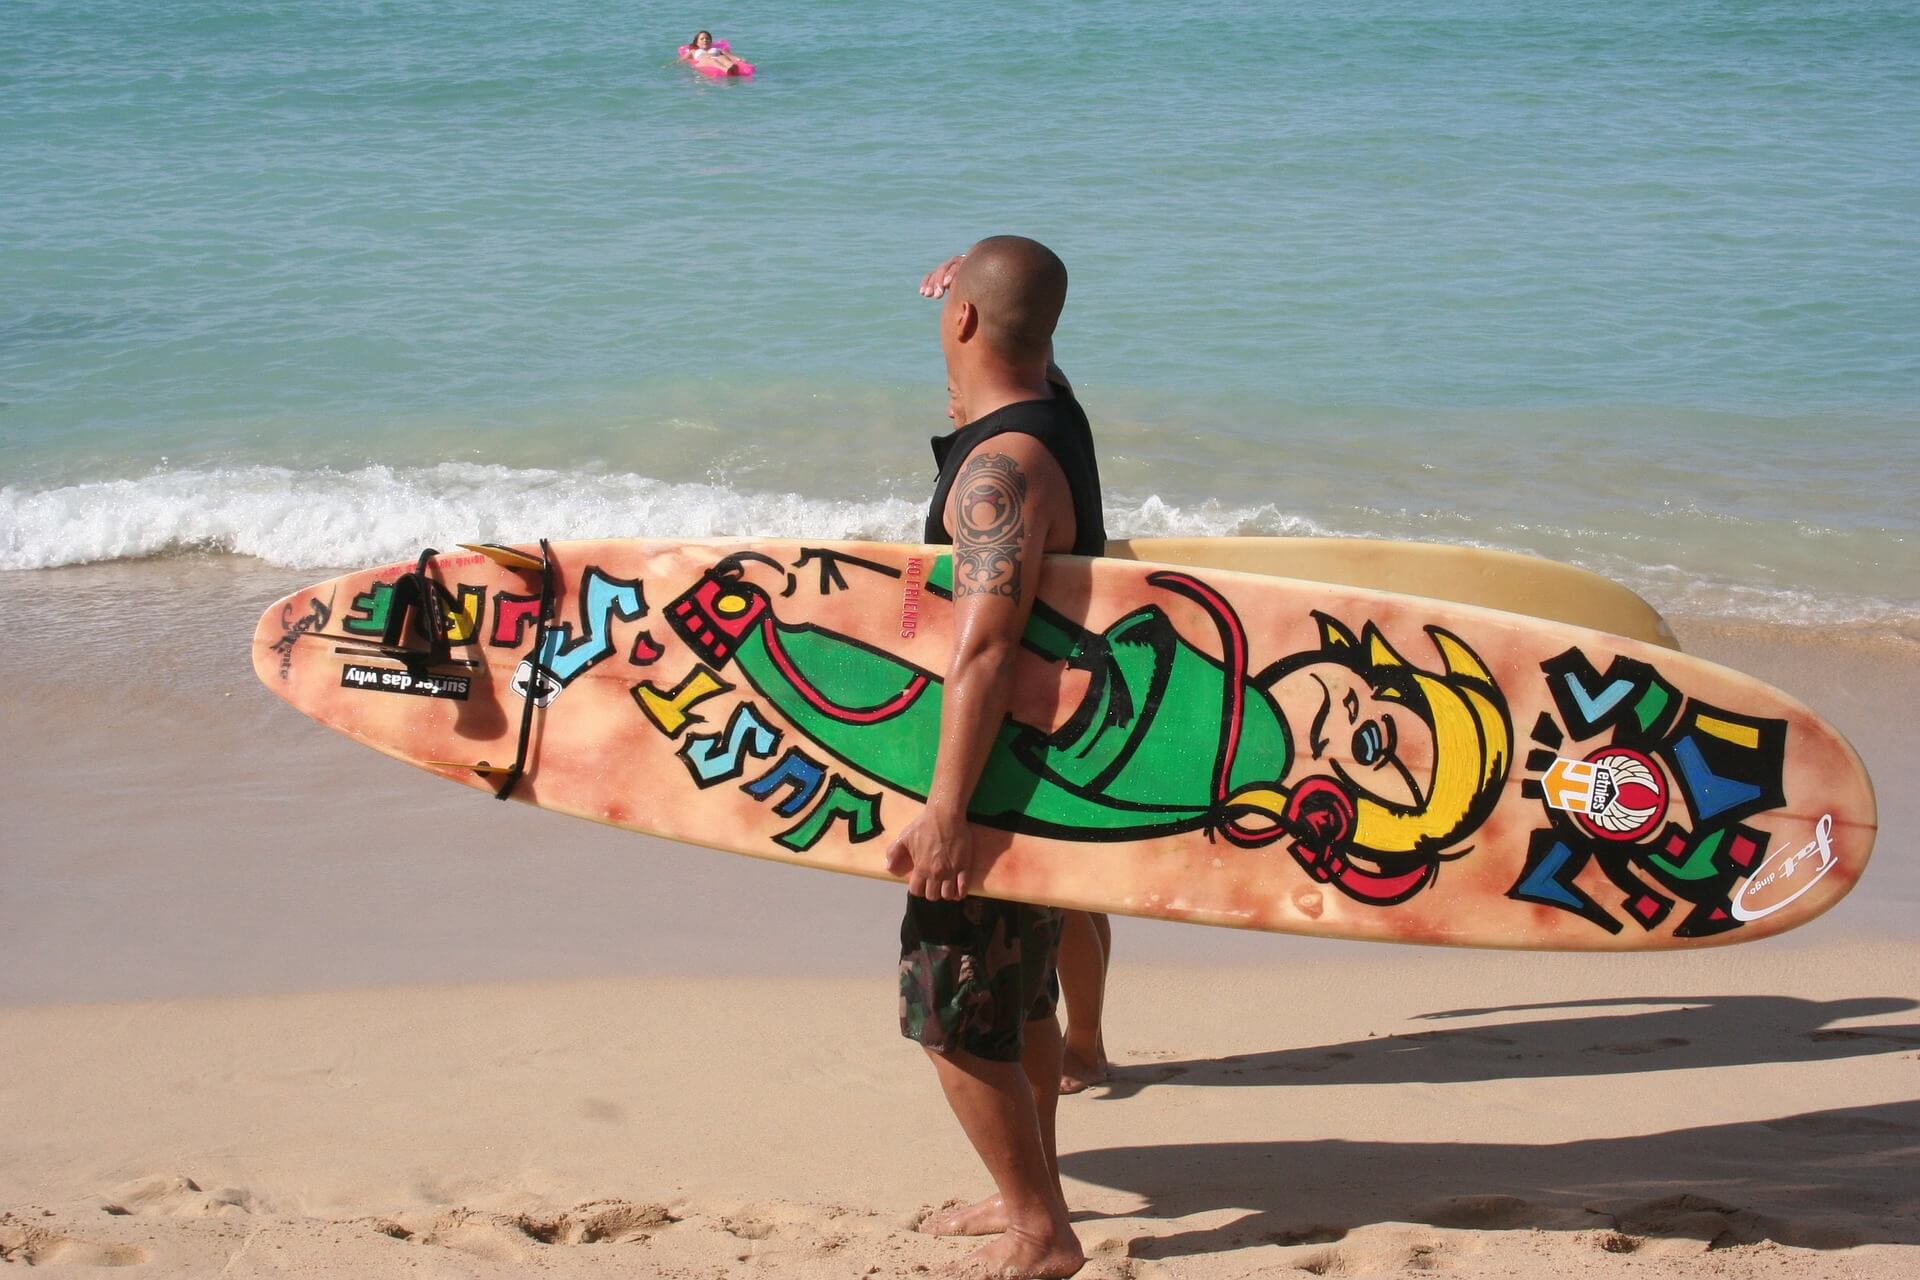 Surfing in Waikiki is one of the best things to do in Hawaii